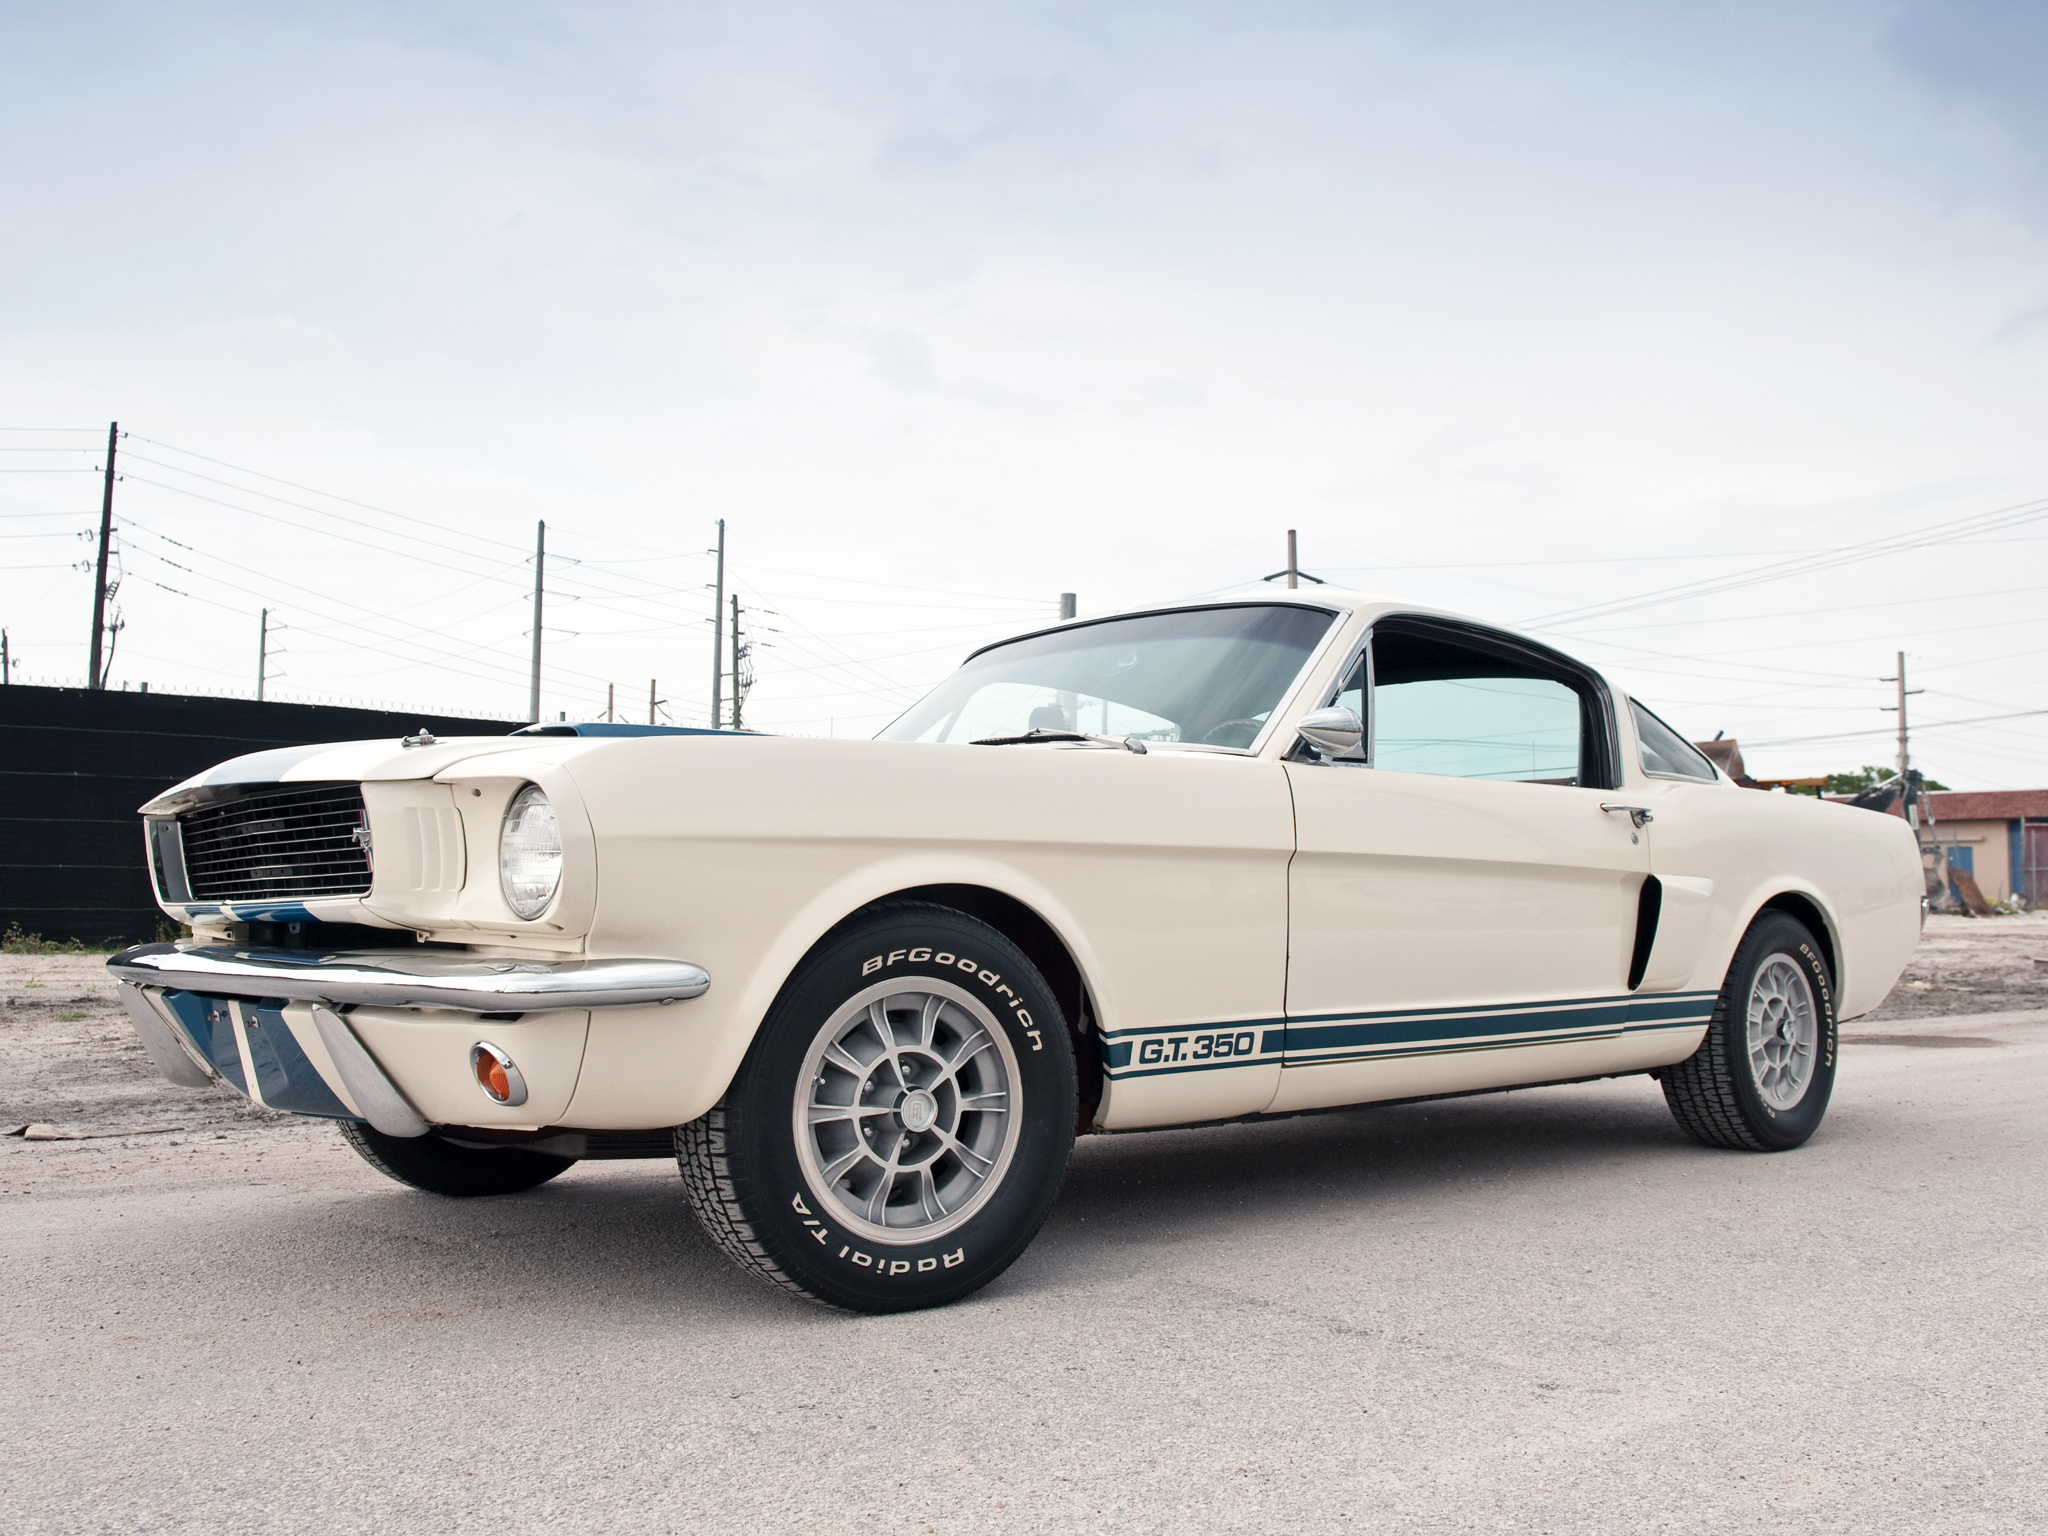 Shelby Gt350 Ford Mustang Classic W Wallpaper